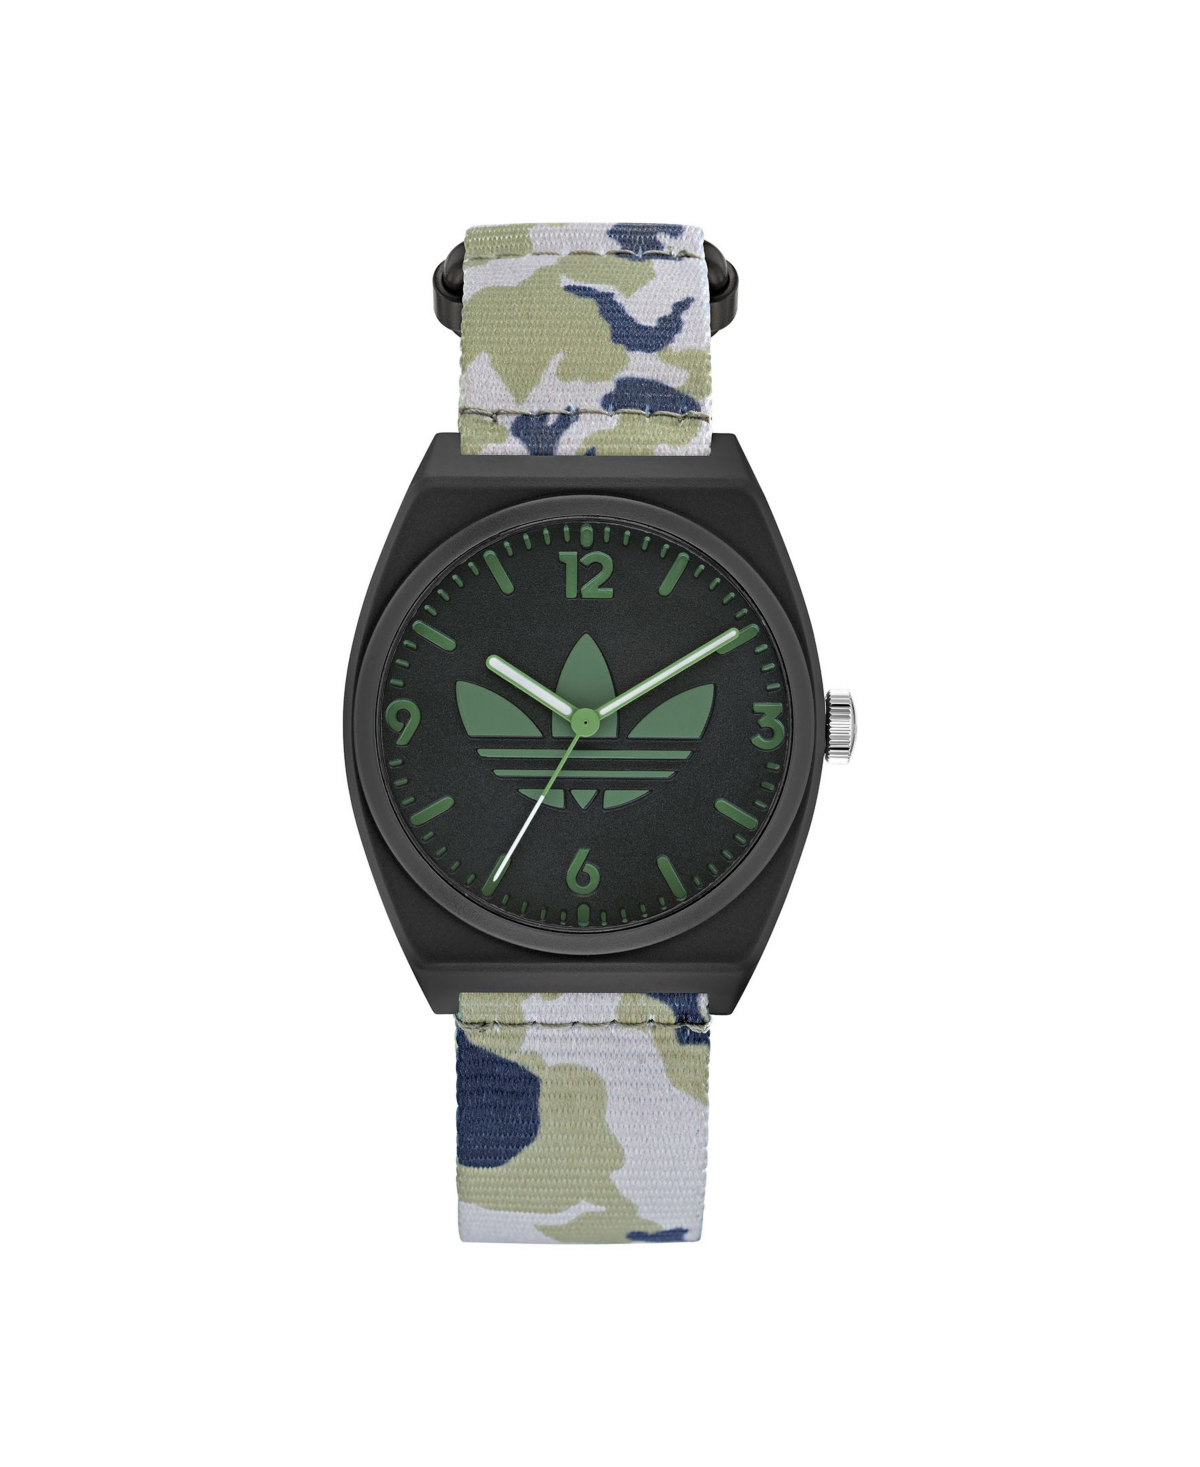 Unisex Three Hand Project Two Camo Fabric Fastwrap Watch 38mm - Multi